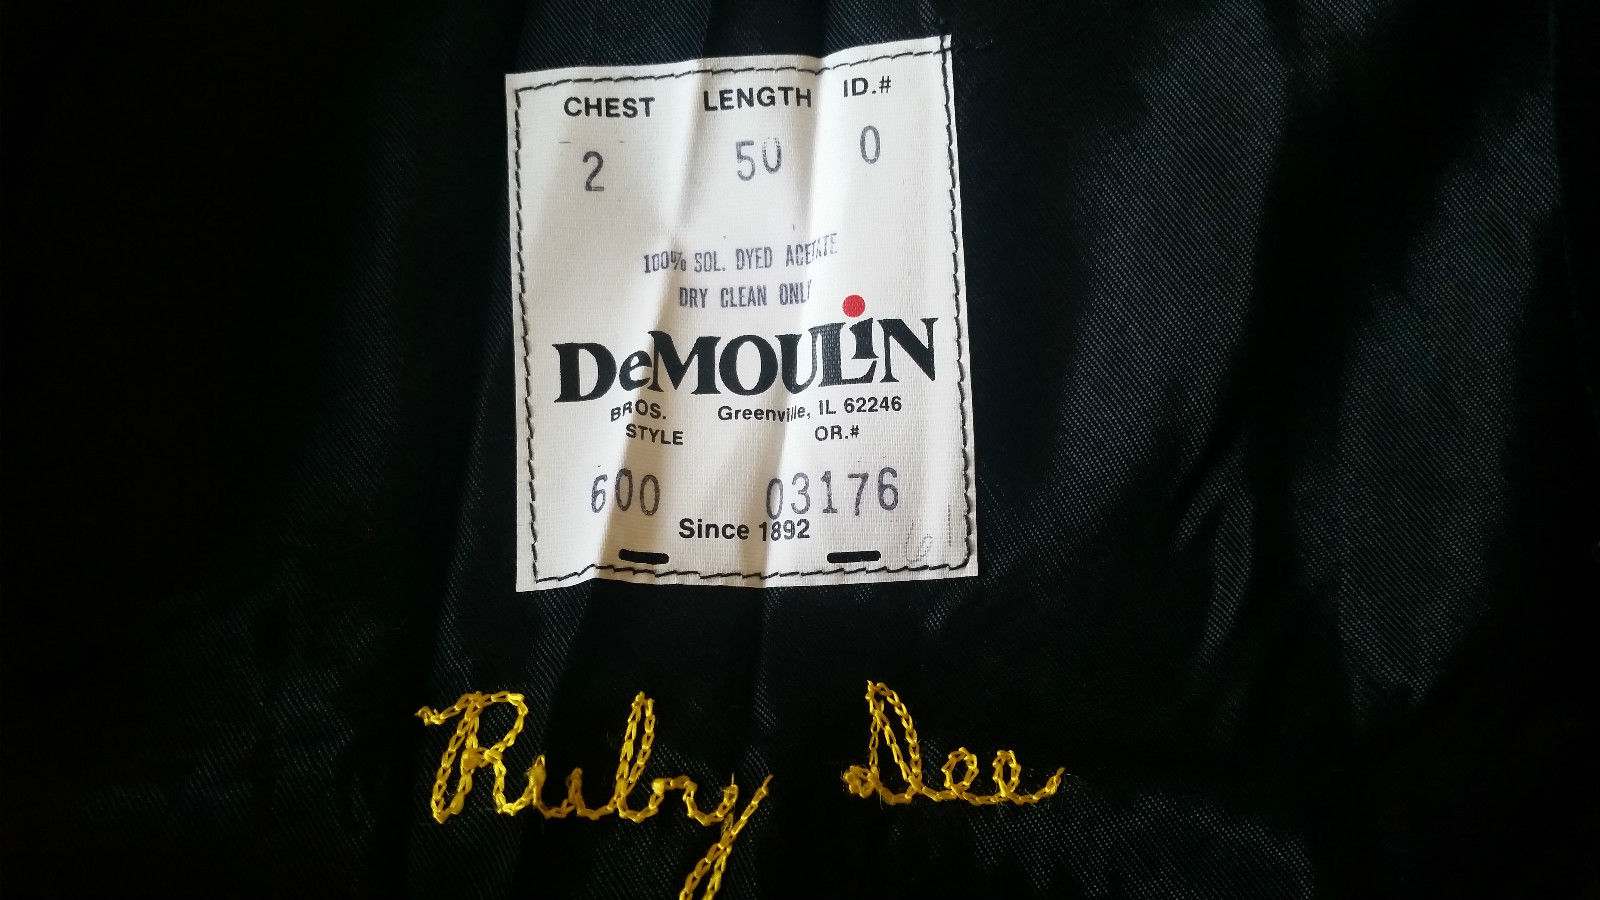 The DeMoulin manufacturing label inside the gown with Ms. Dee’s name embroidered below it.